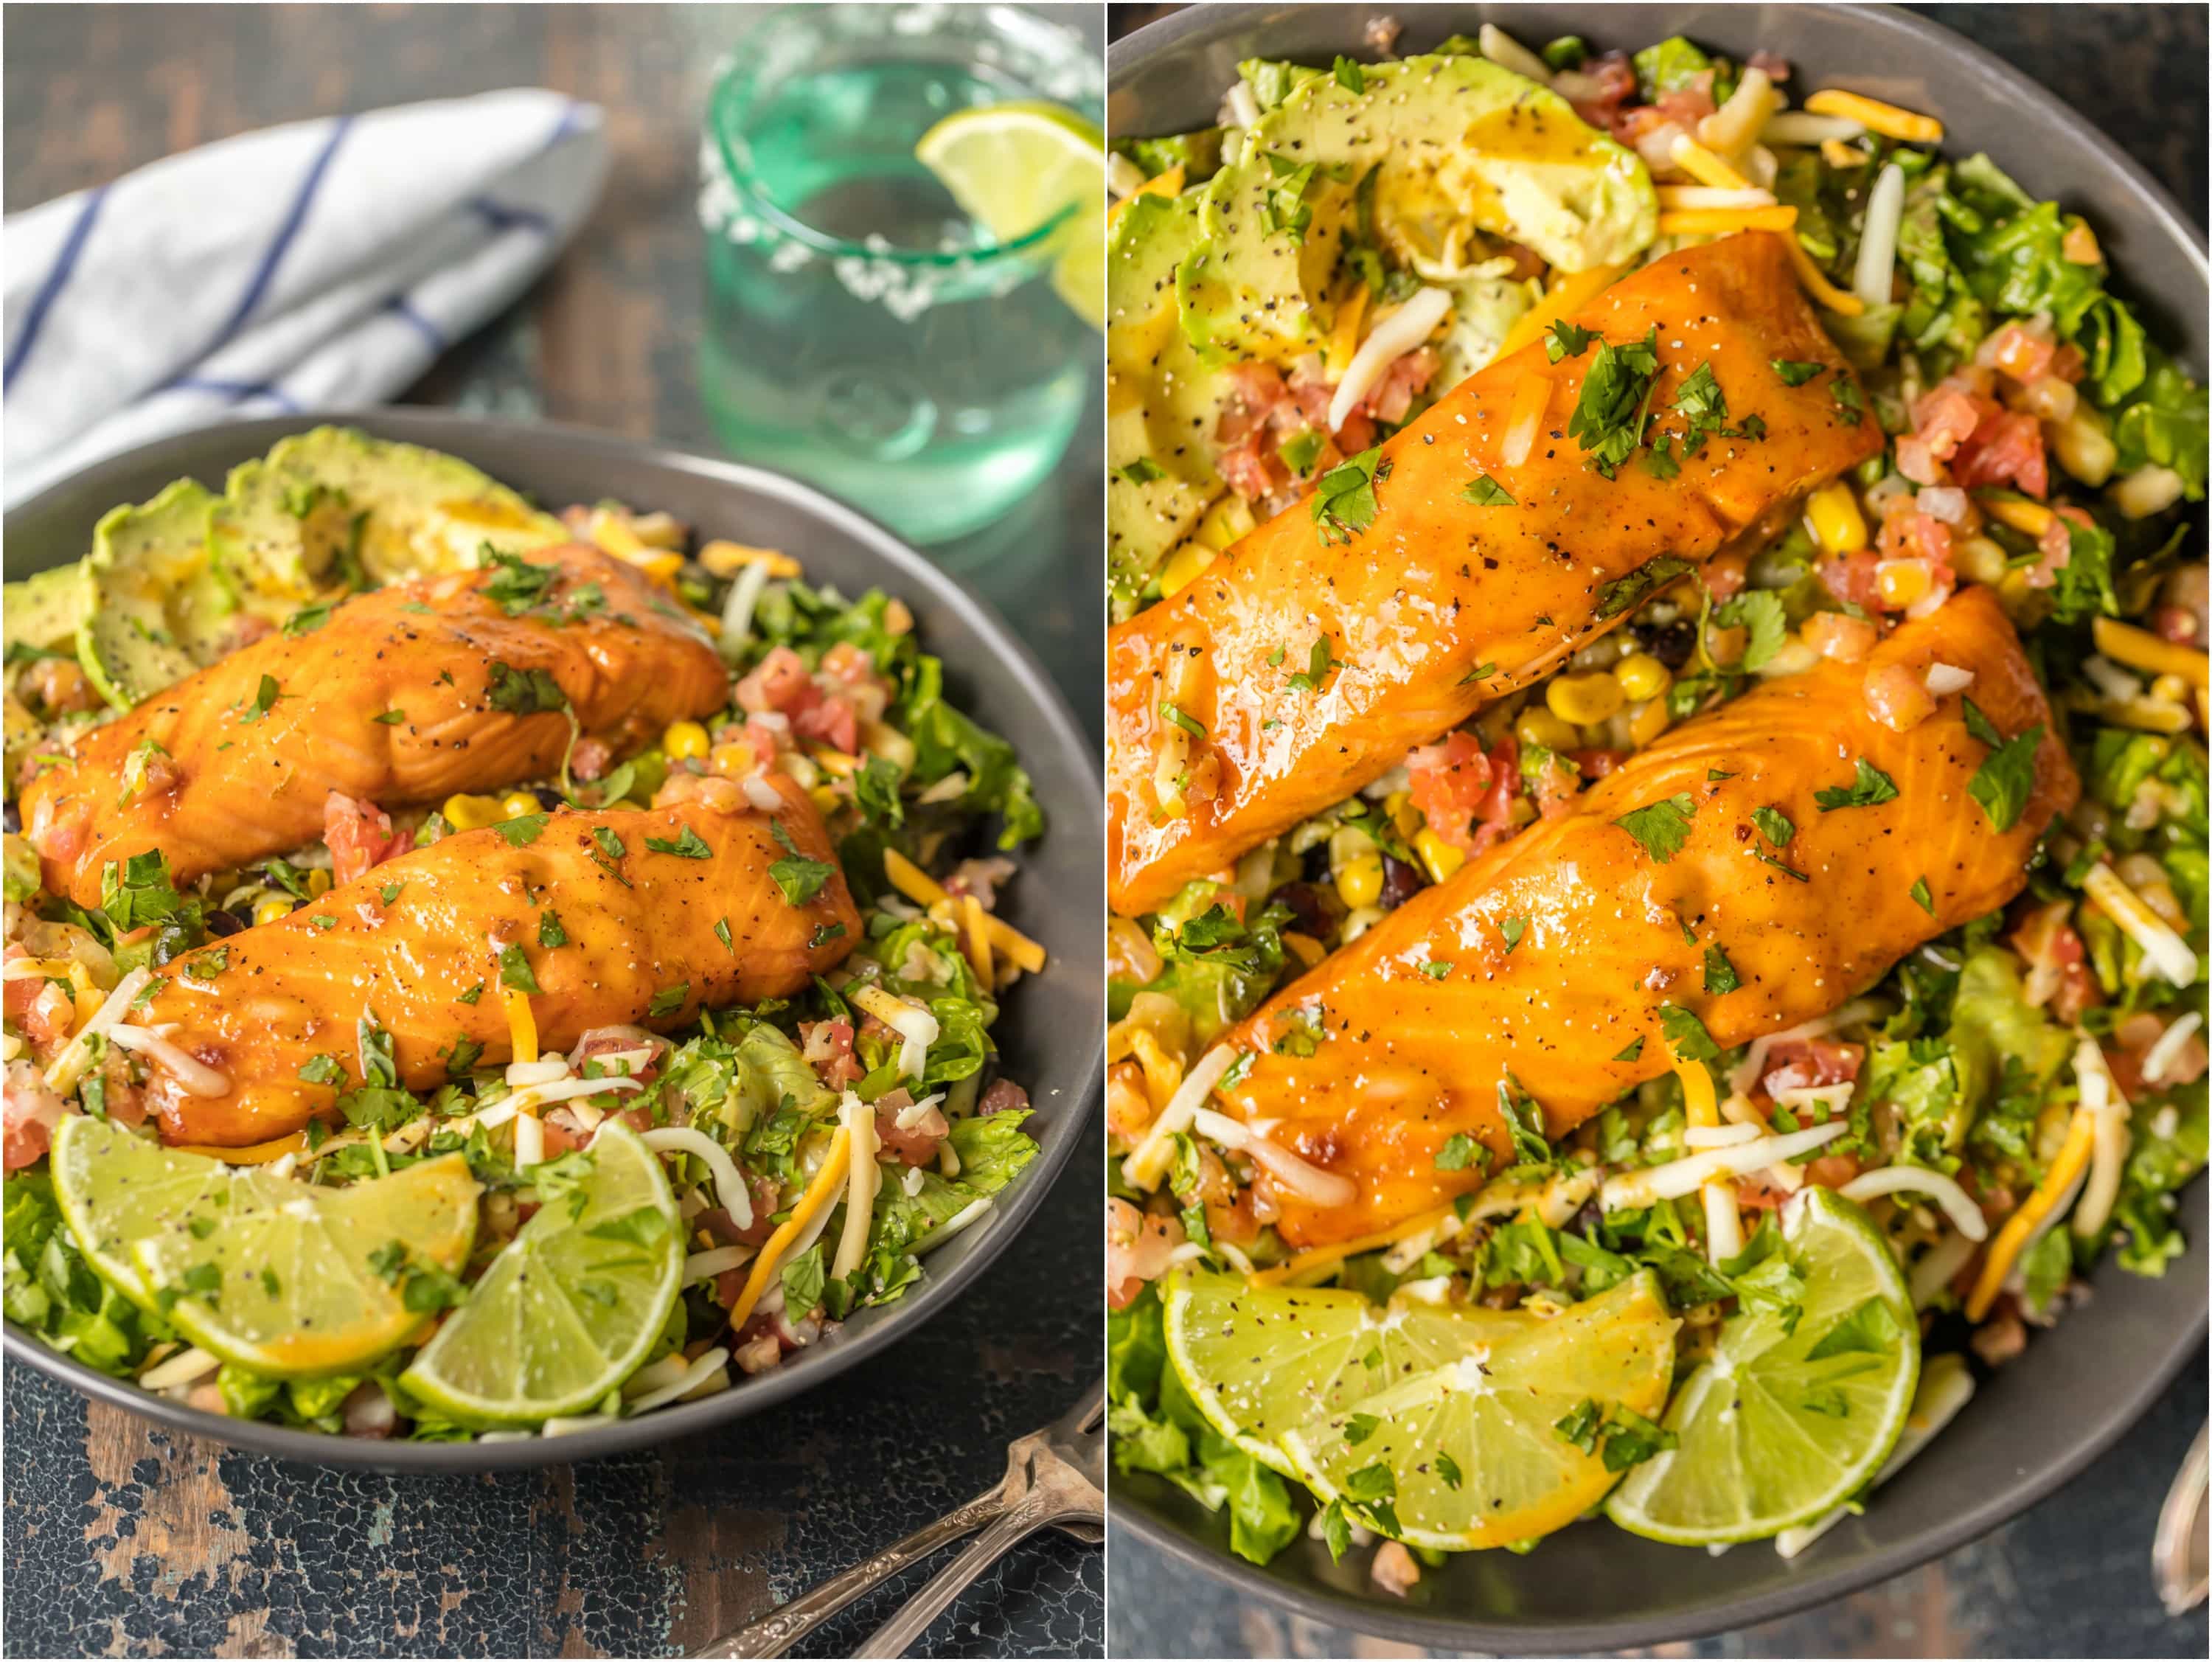 This TEQUILA LIME SALMON SALAD is the perfect hearty and delicious salad for any occasion! Salmon topped with a spicy tequila lime marinade and laid atop a bed of lettuce, corn, beans, avocado, pico, and more! SO MUCH FLAVOR!